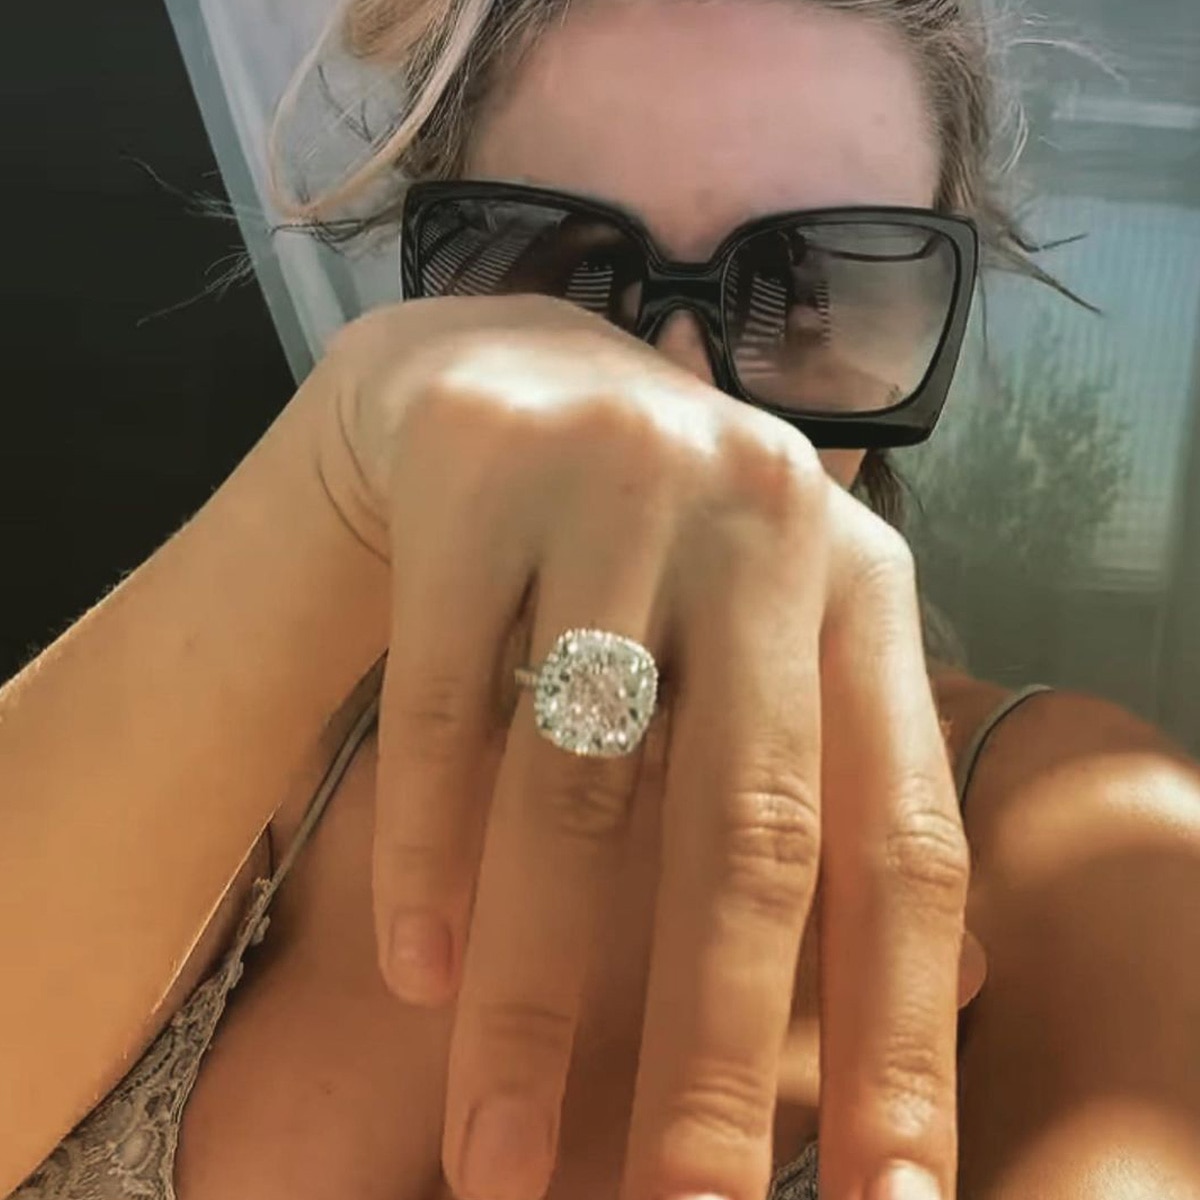 Man loses legal bid to reclaim $45k diamond engagement ring after split  with fianceé - NZ Herald